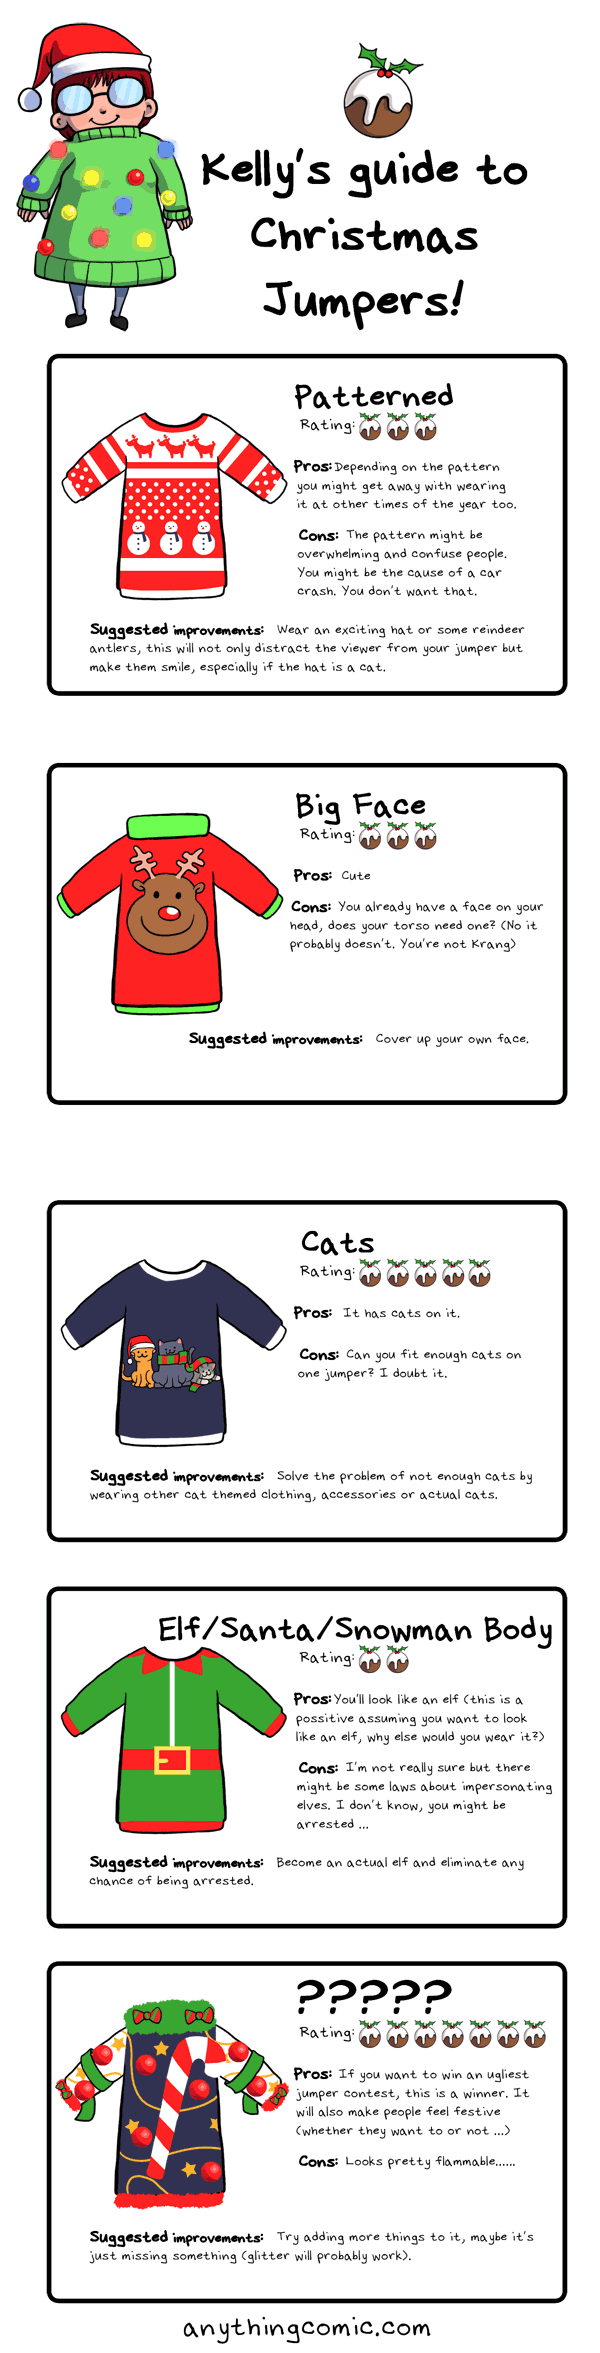 Guide to Christmas Jumpers